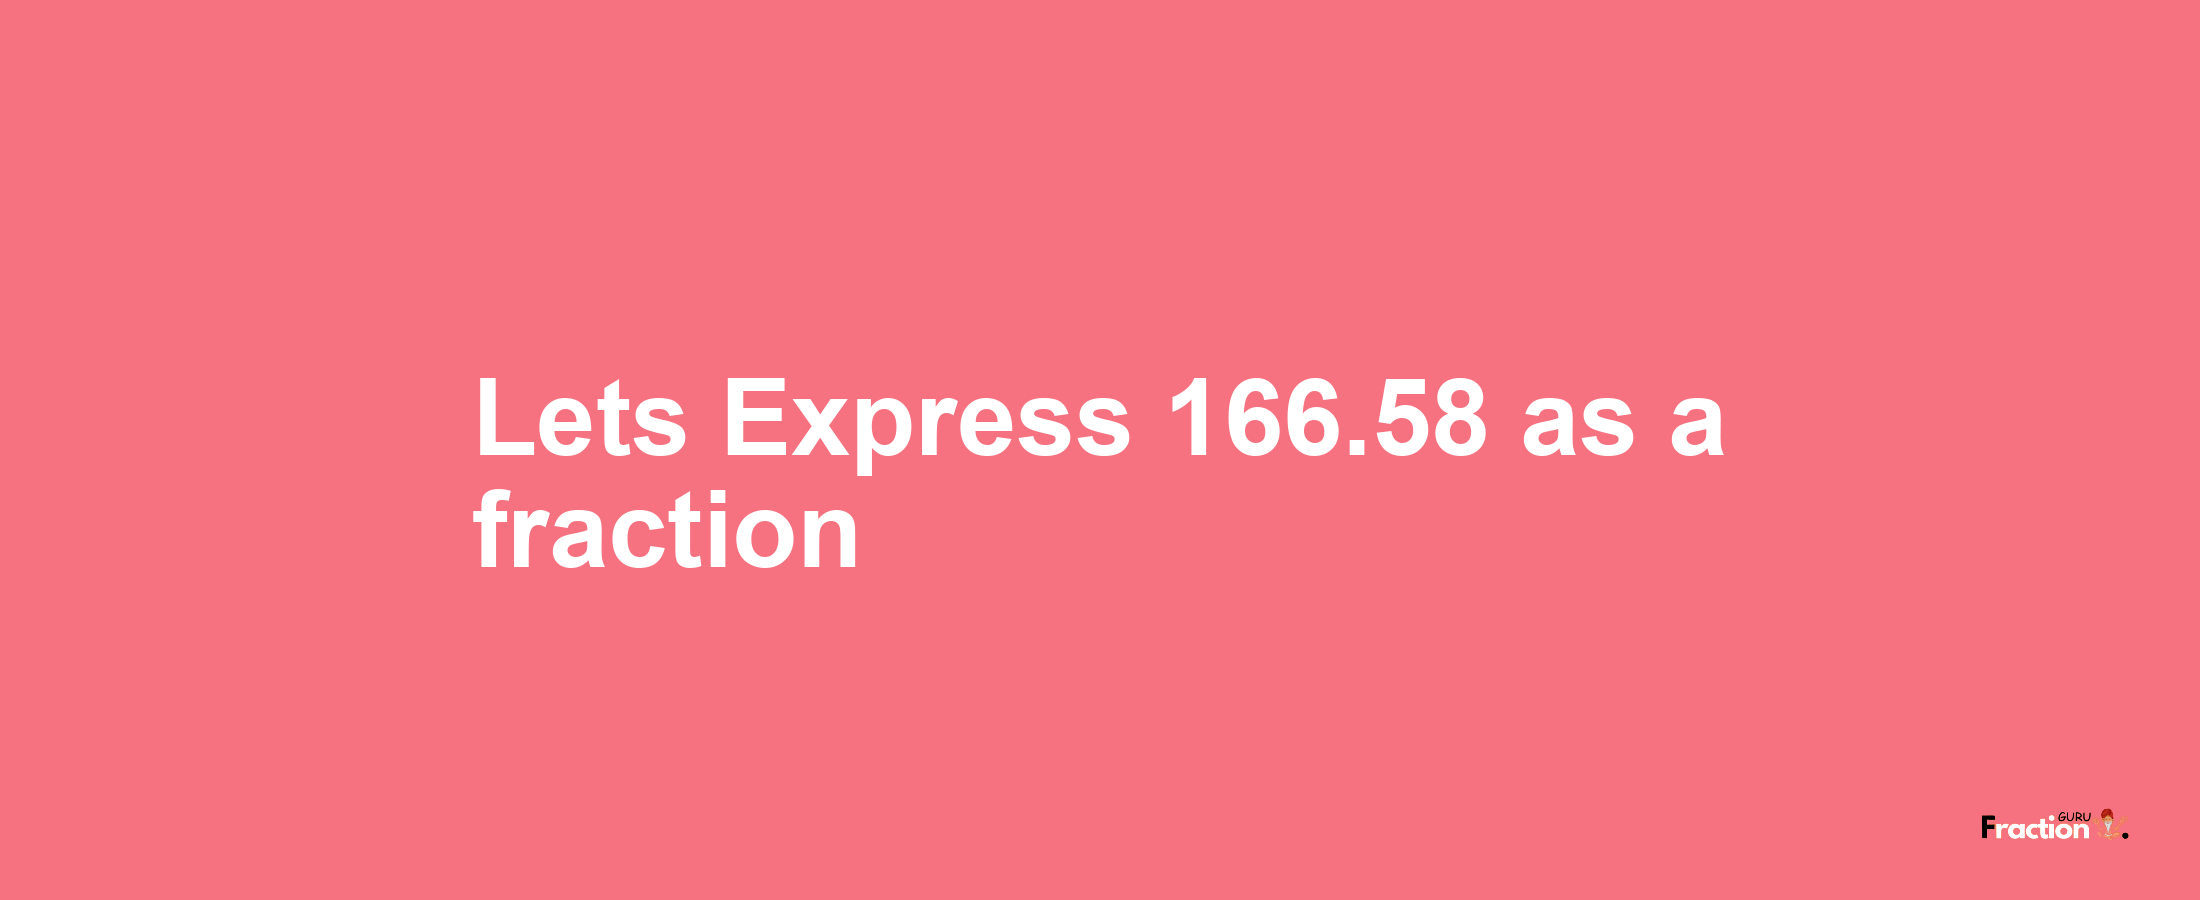 Lets Express 166.58 as afraction